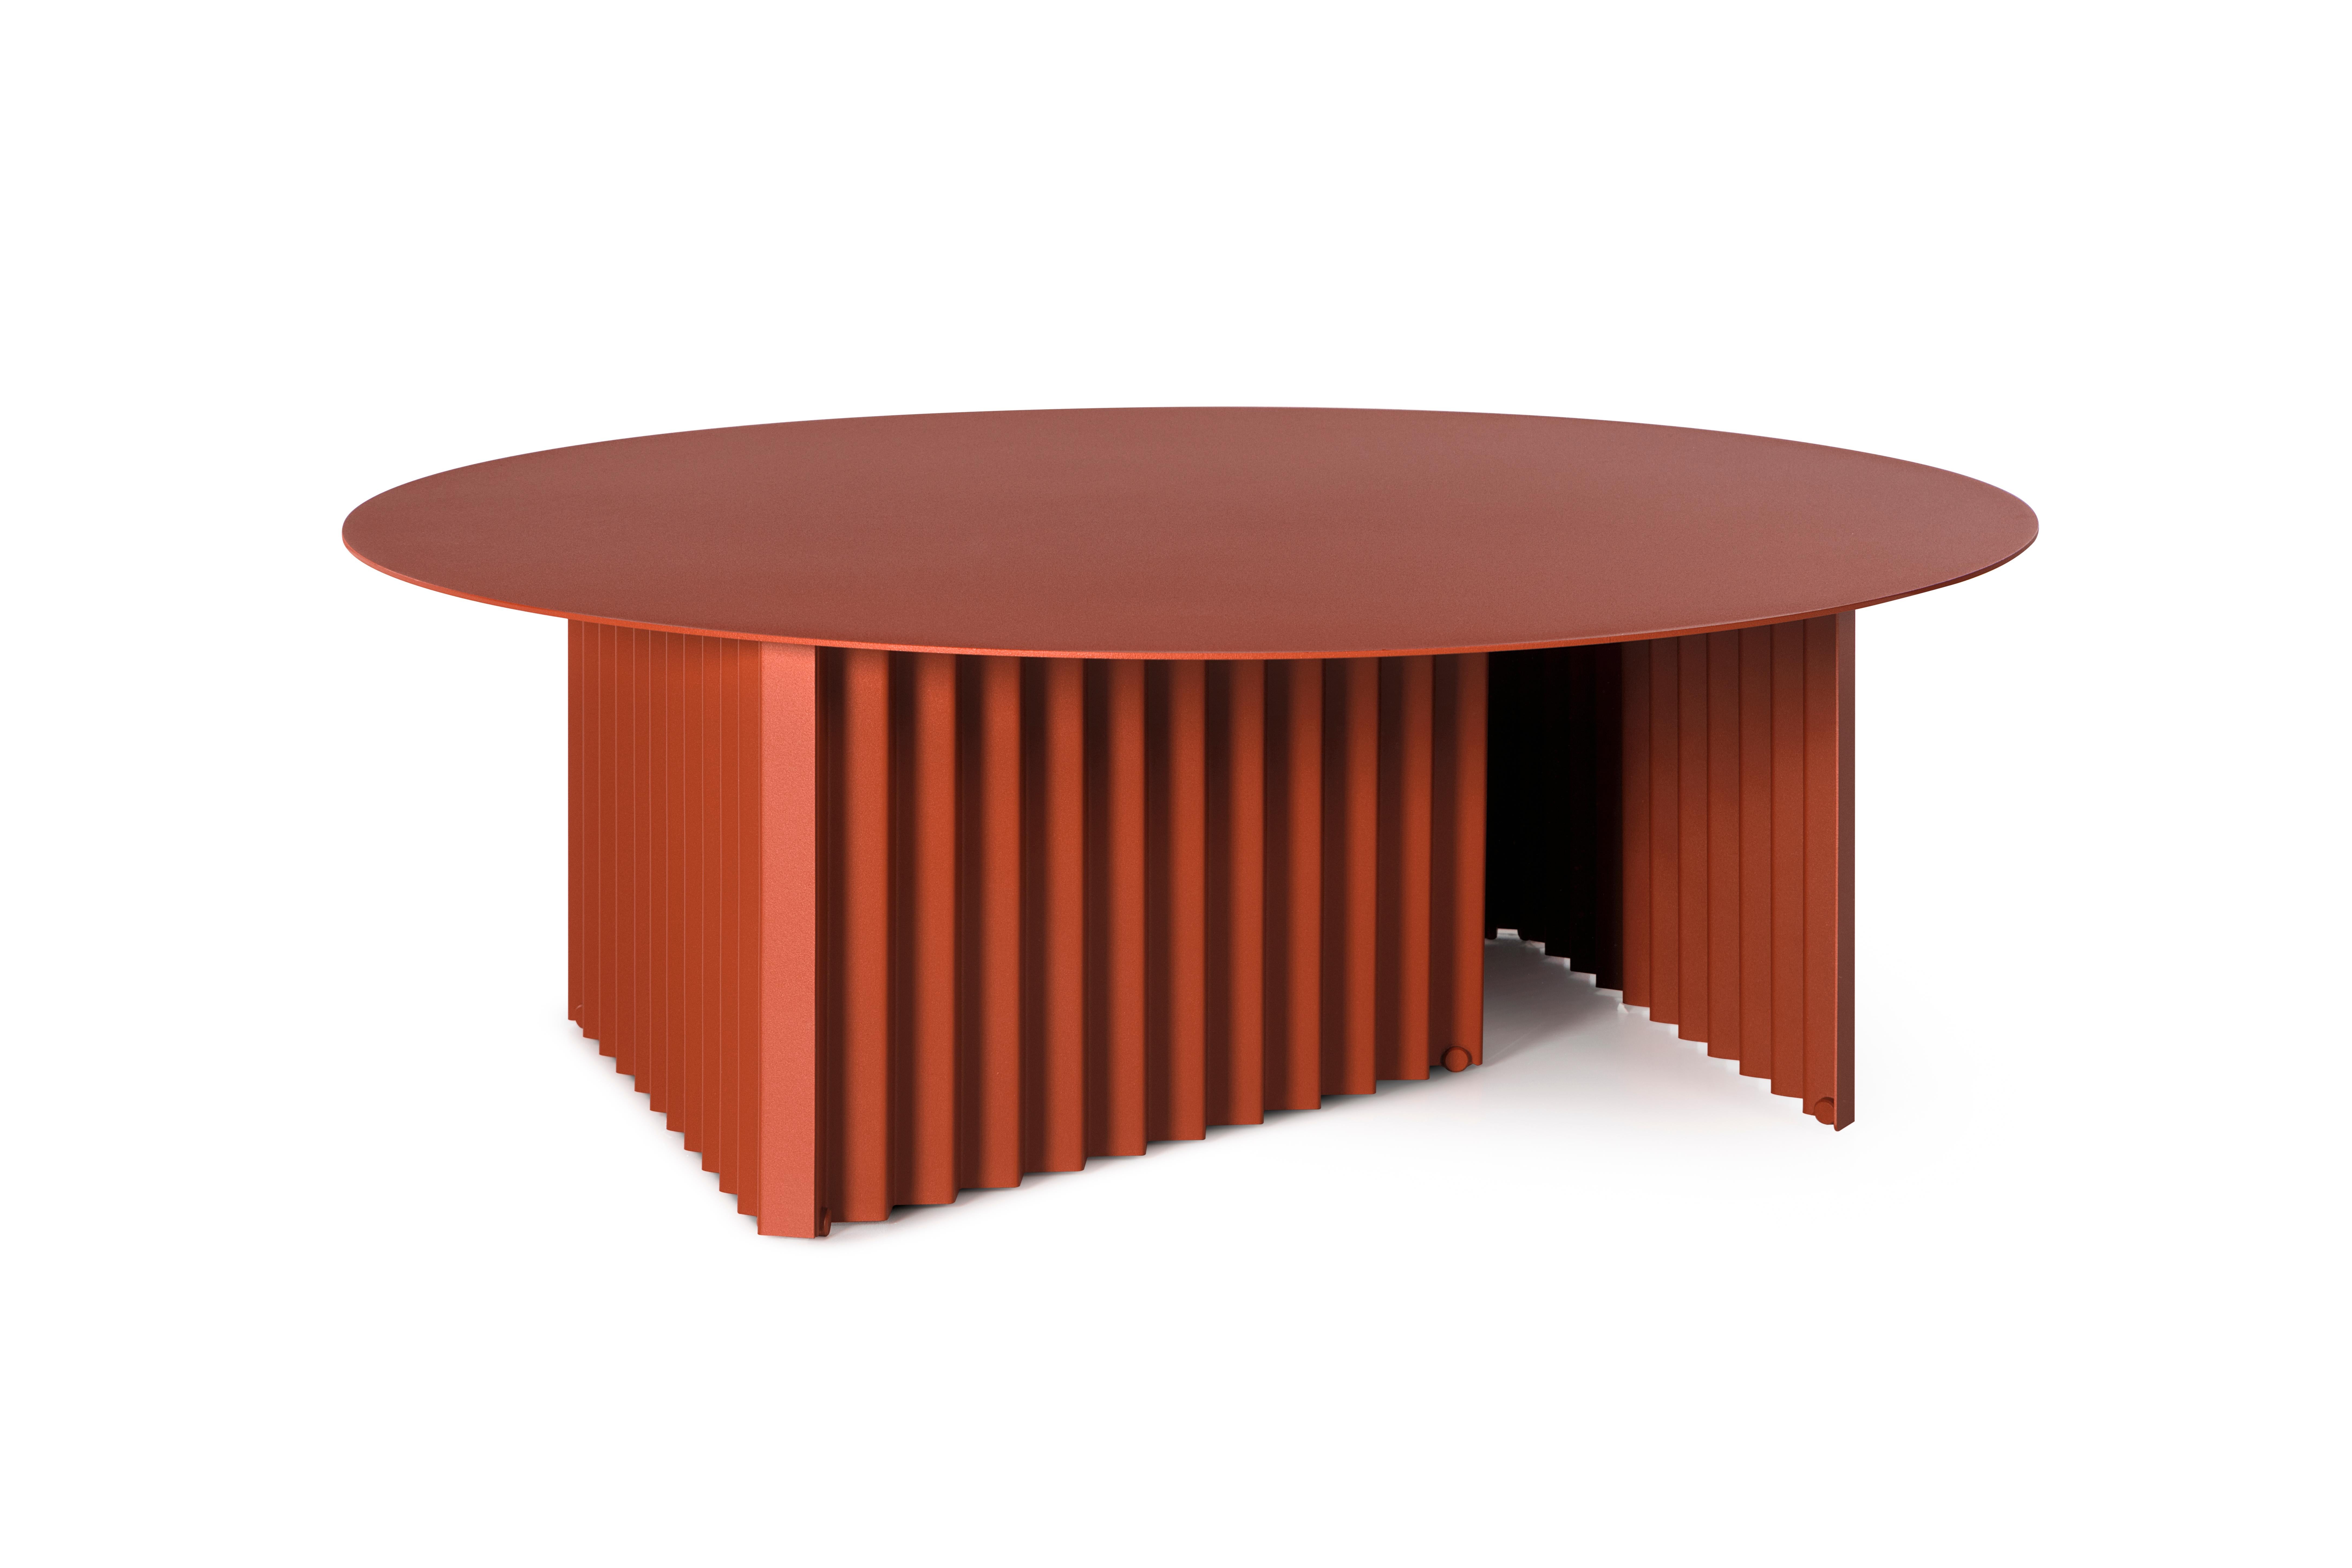 RS Barcelona Plec Round Large Table in Red Metal by A.P.O.